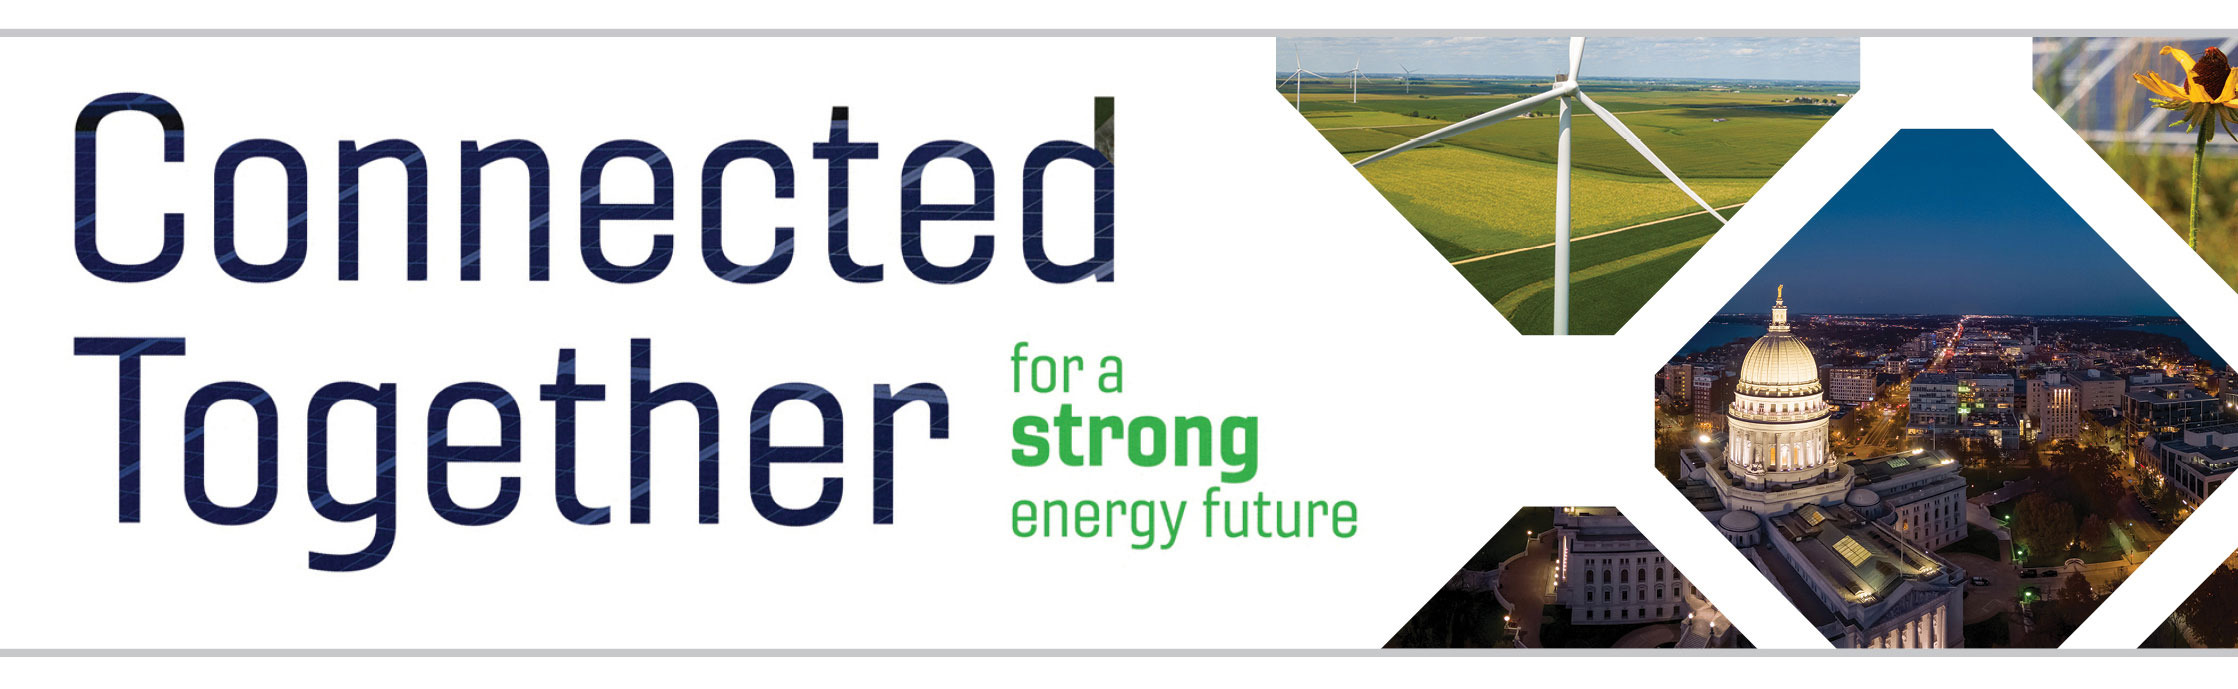 Connected together for a strong energy future